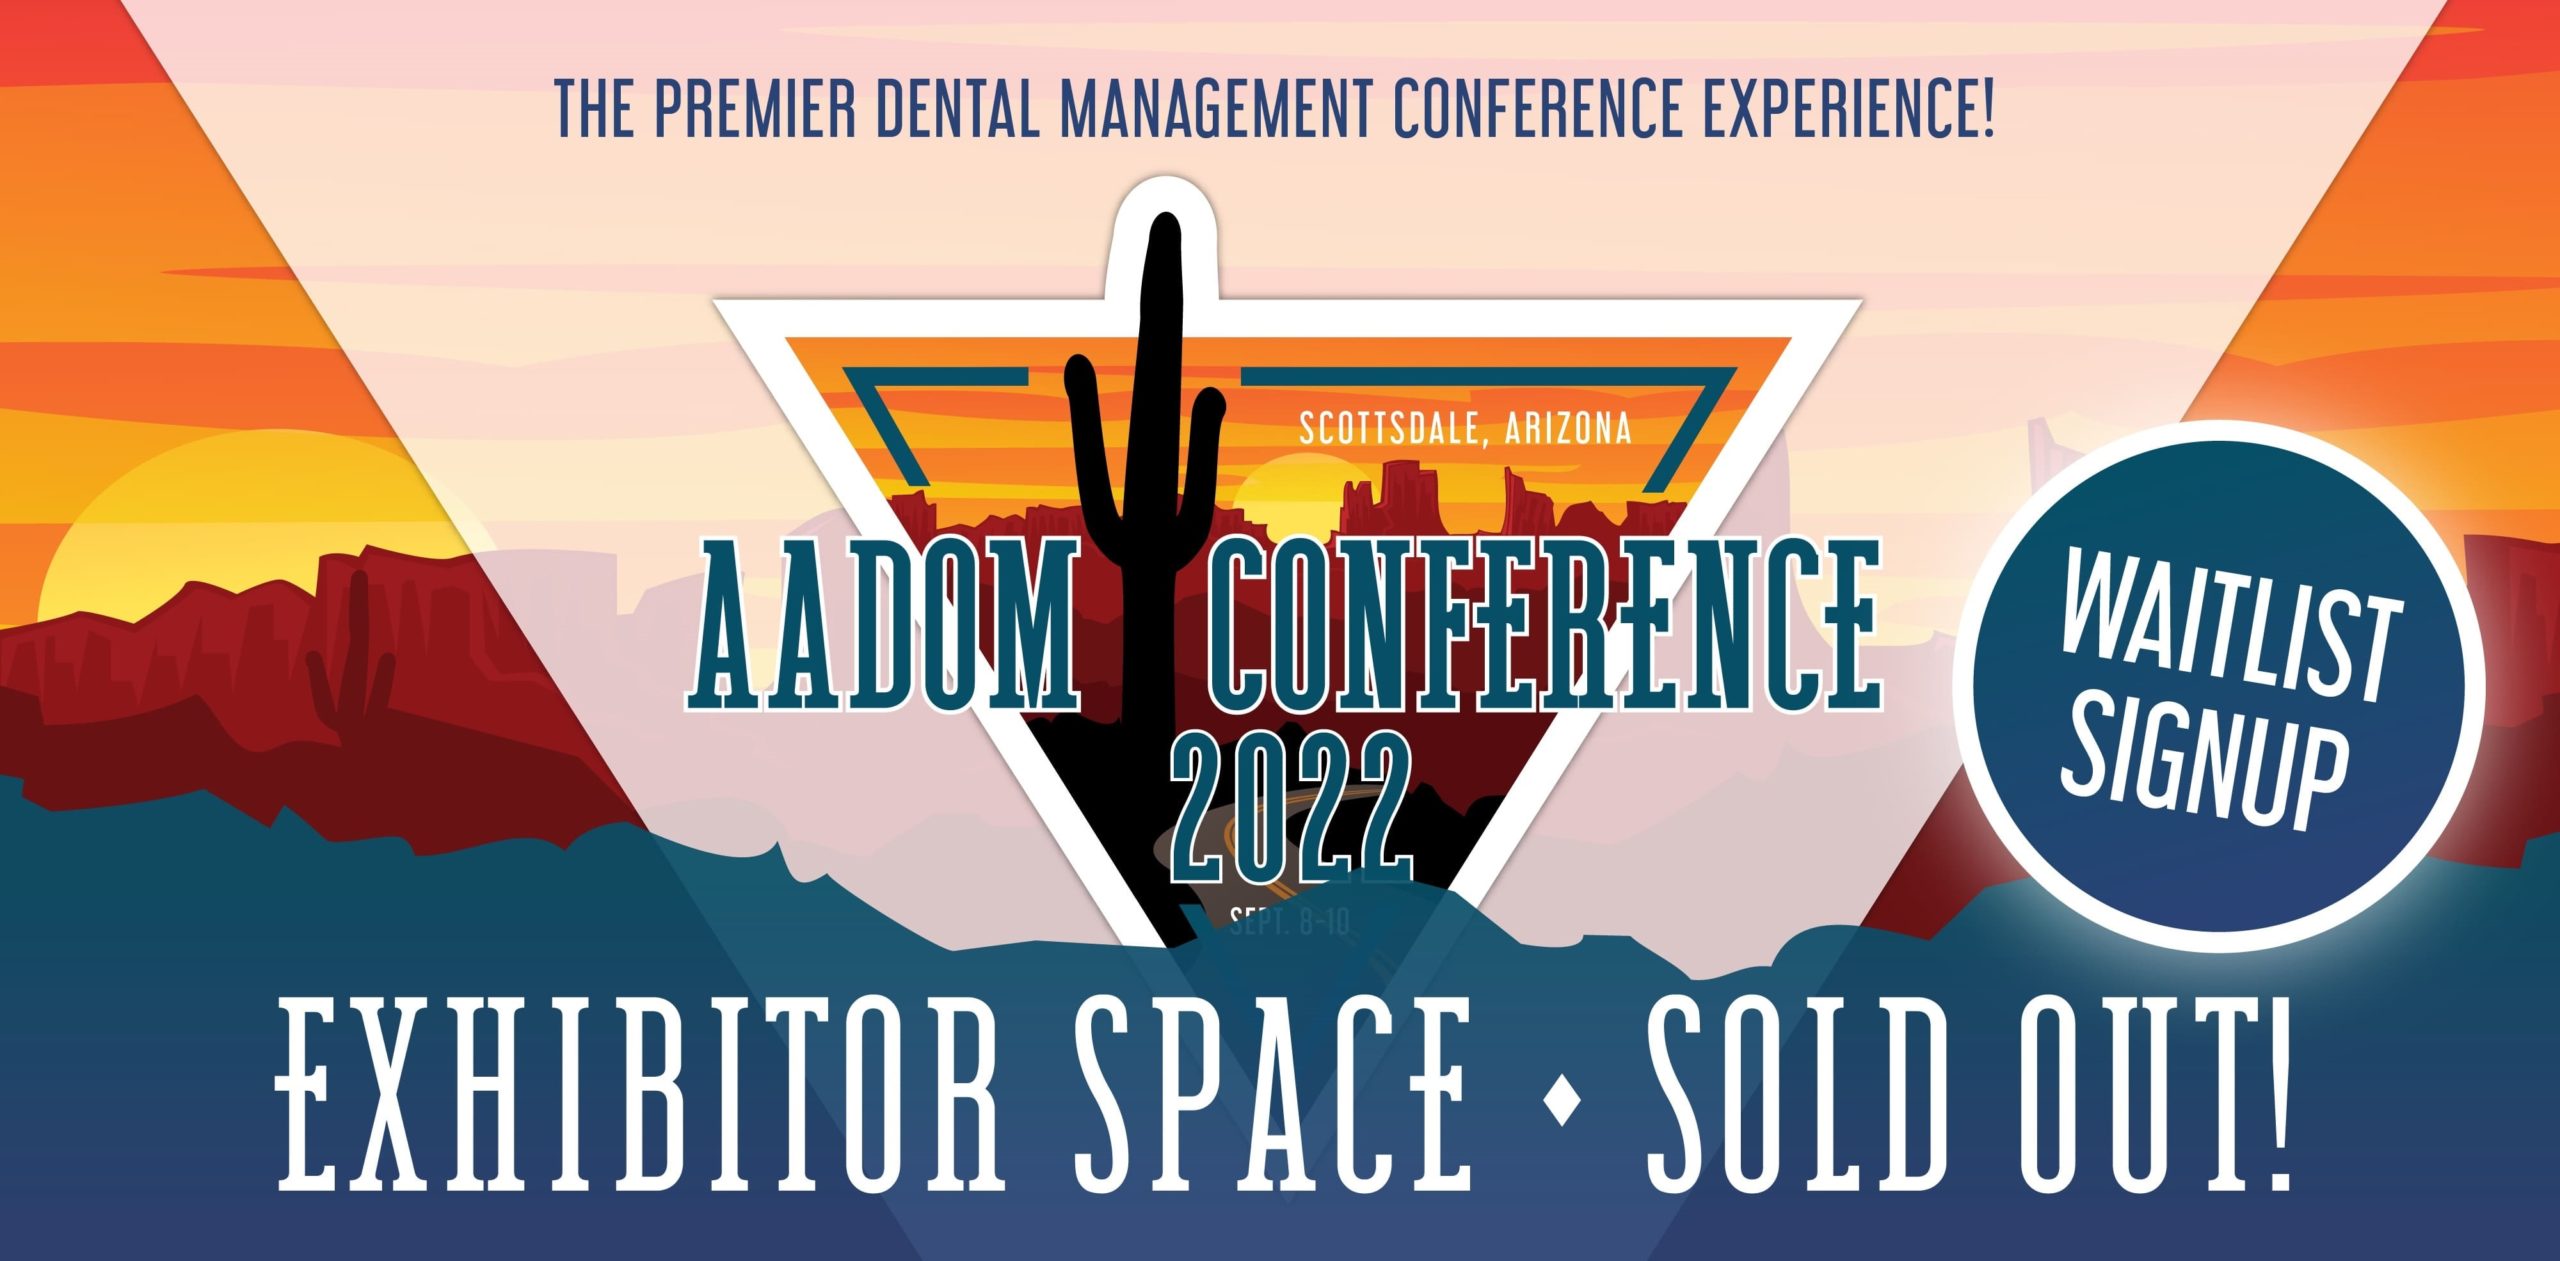 Register Now for the 2022 Scottsdale Conference